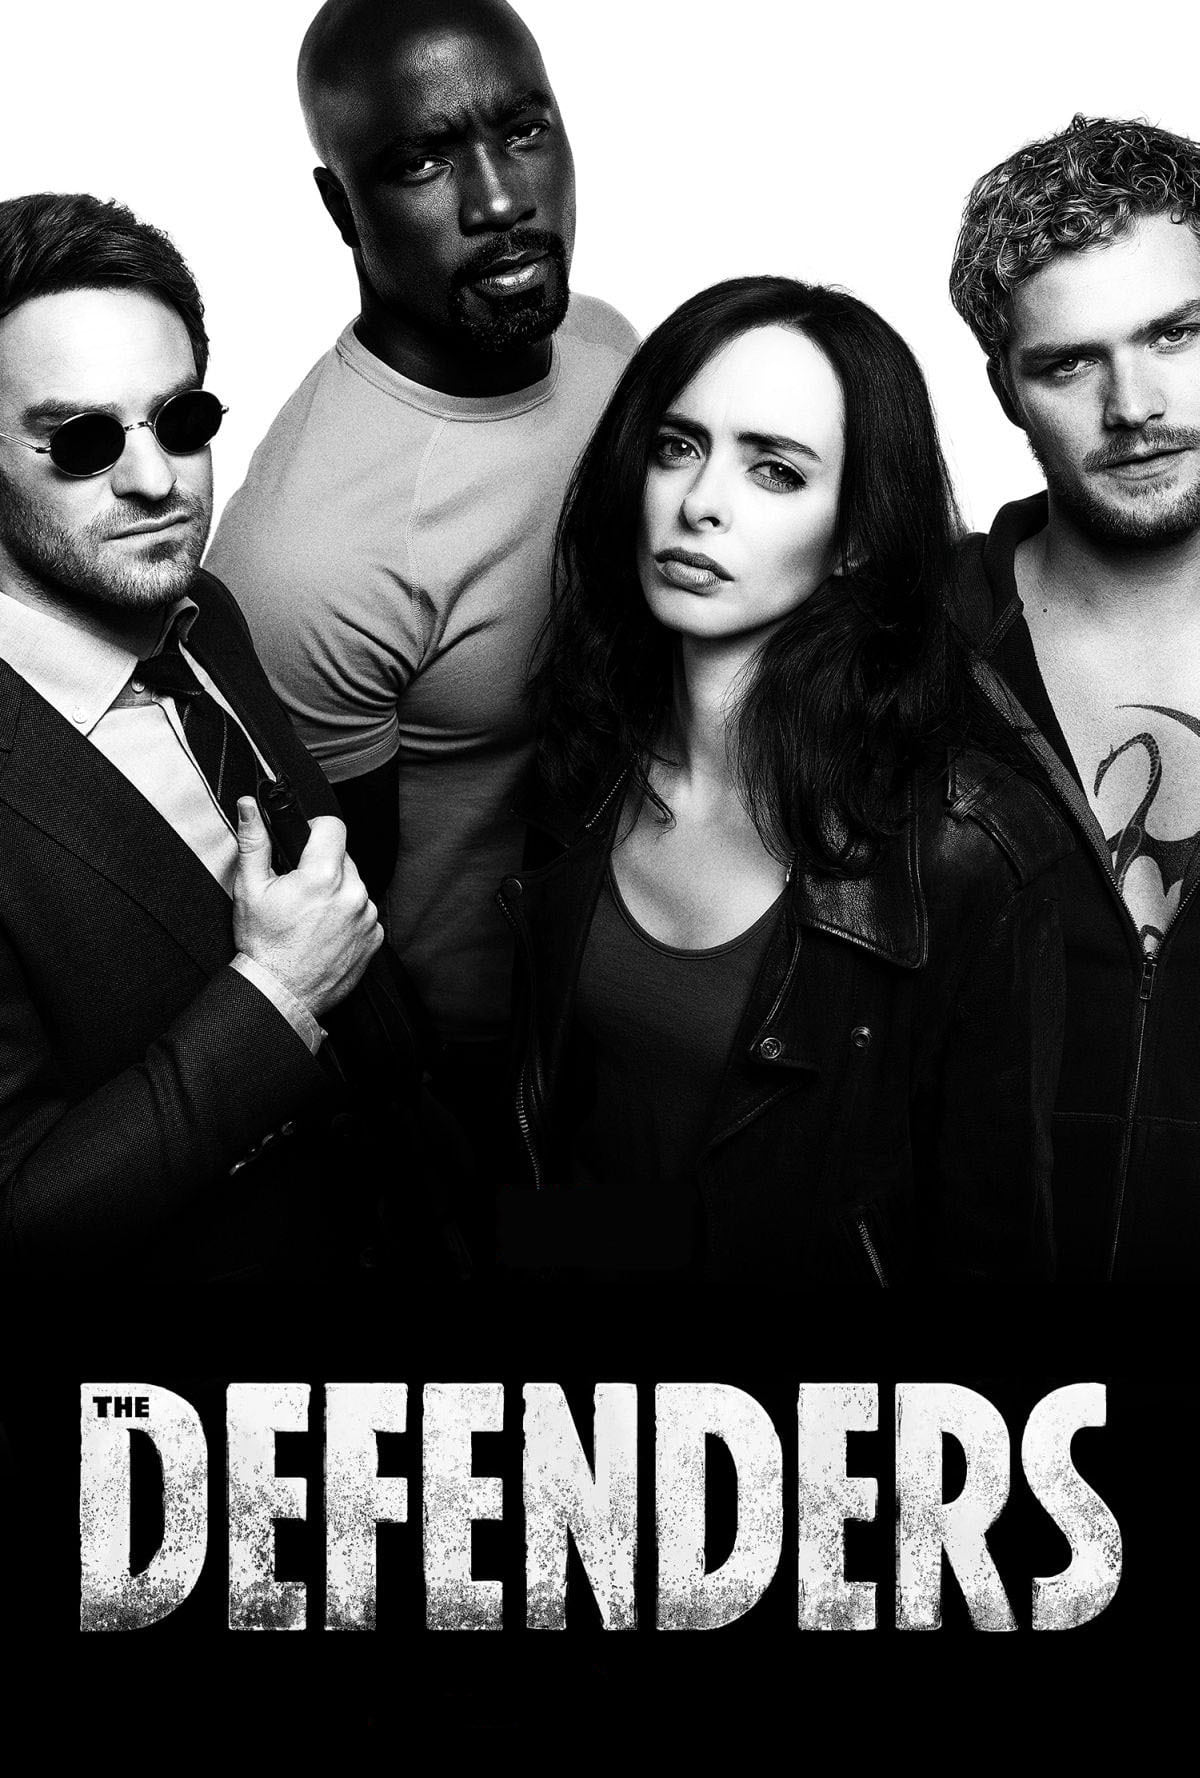 Image Marvel - The Defenders